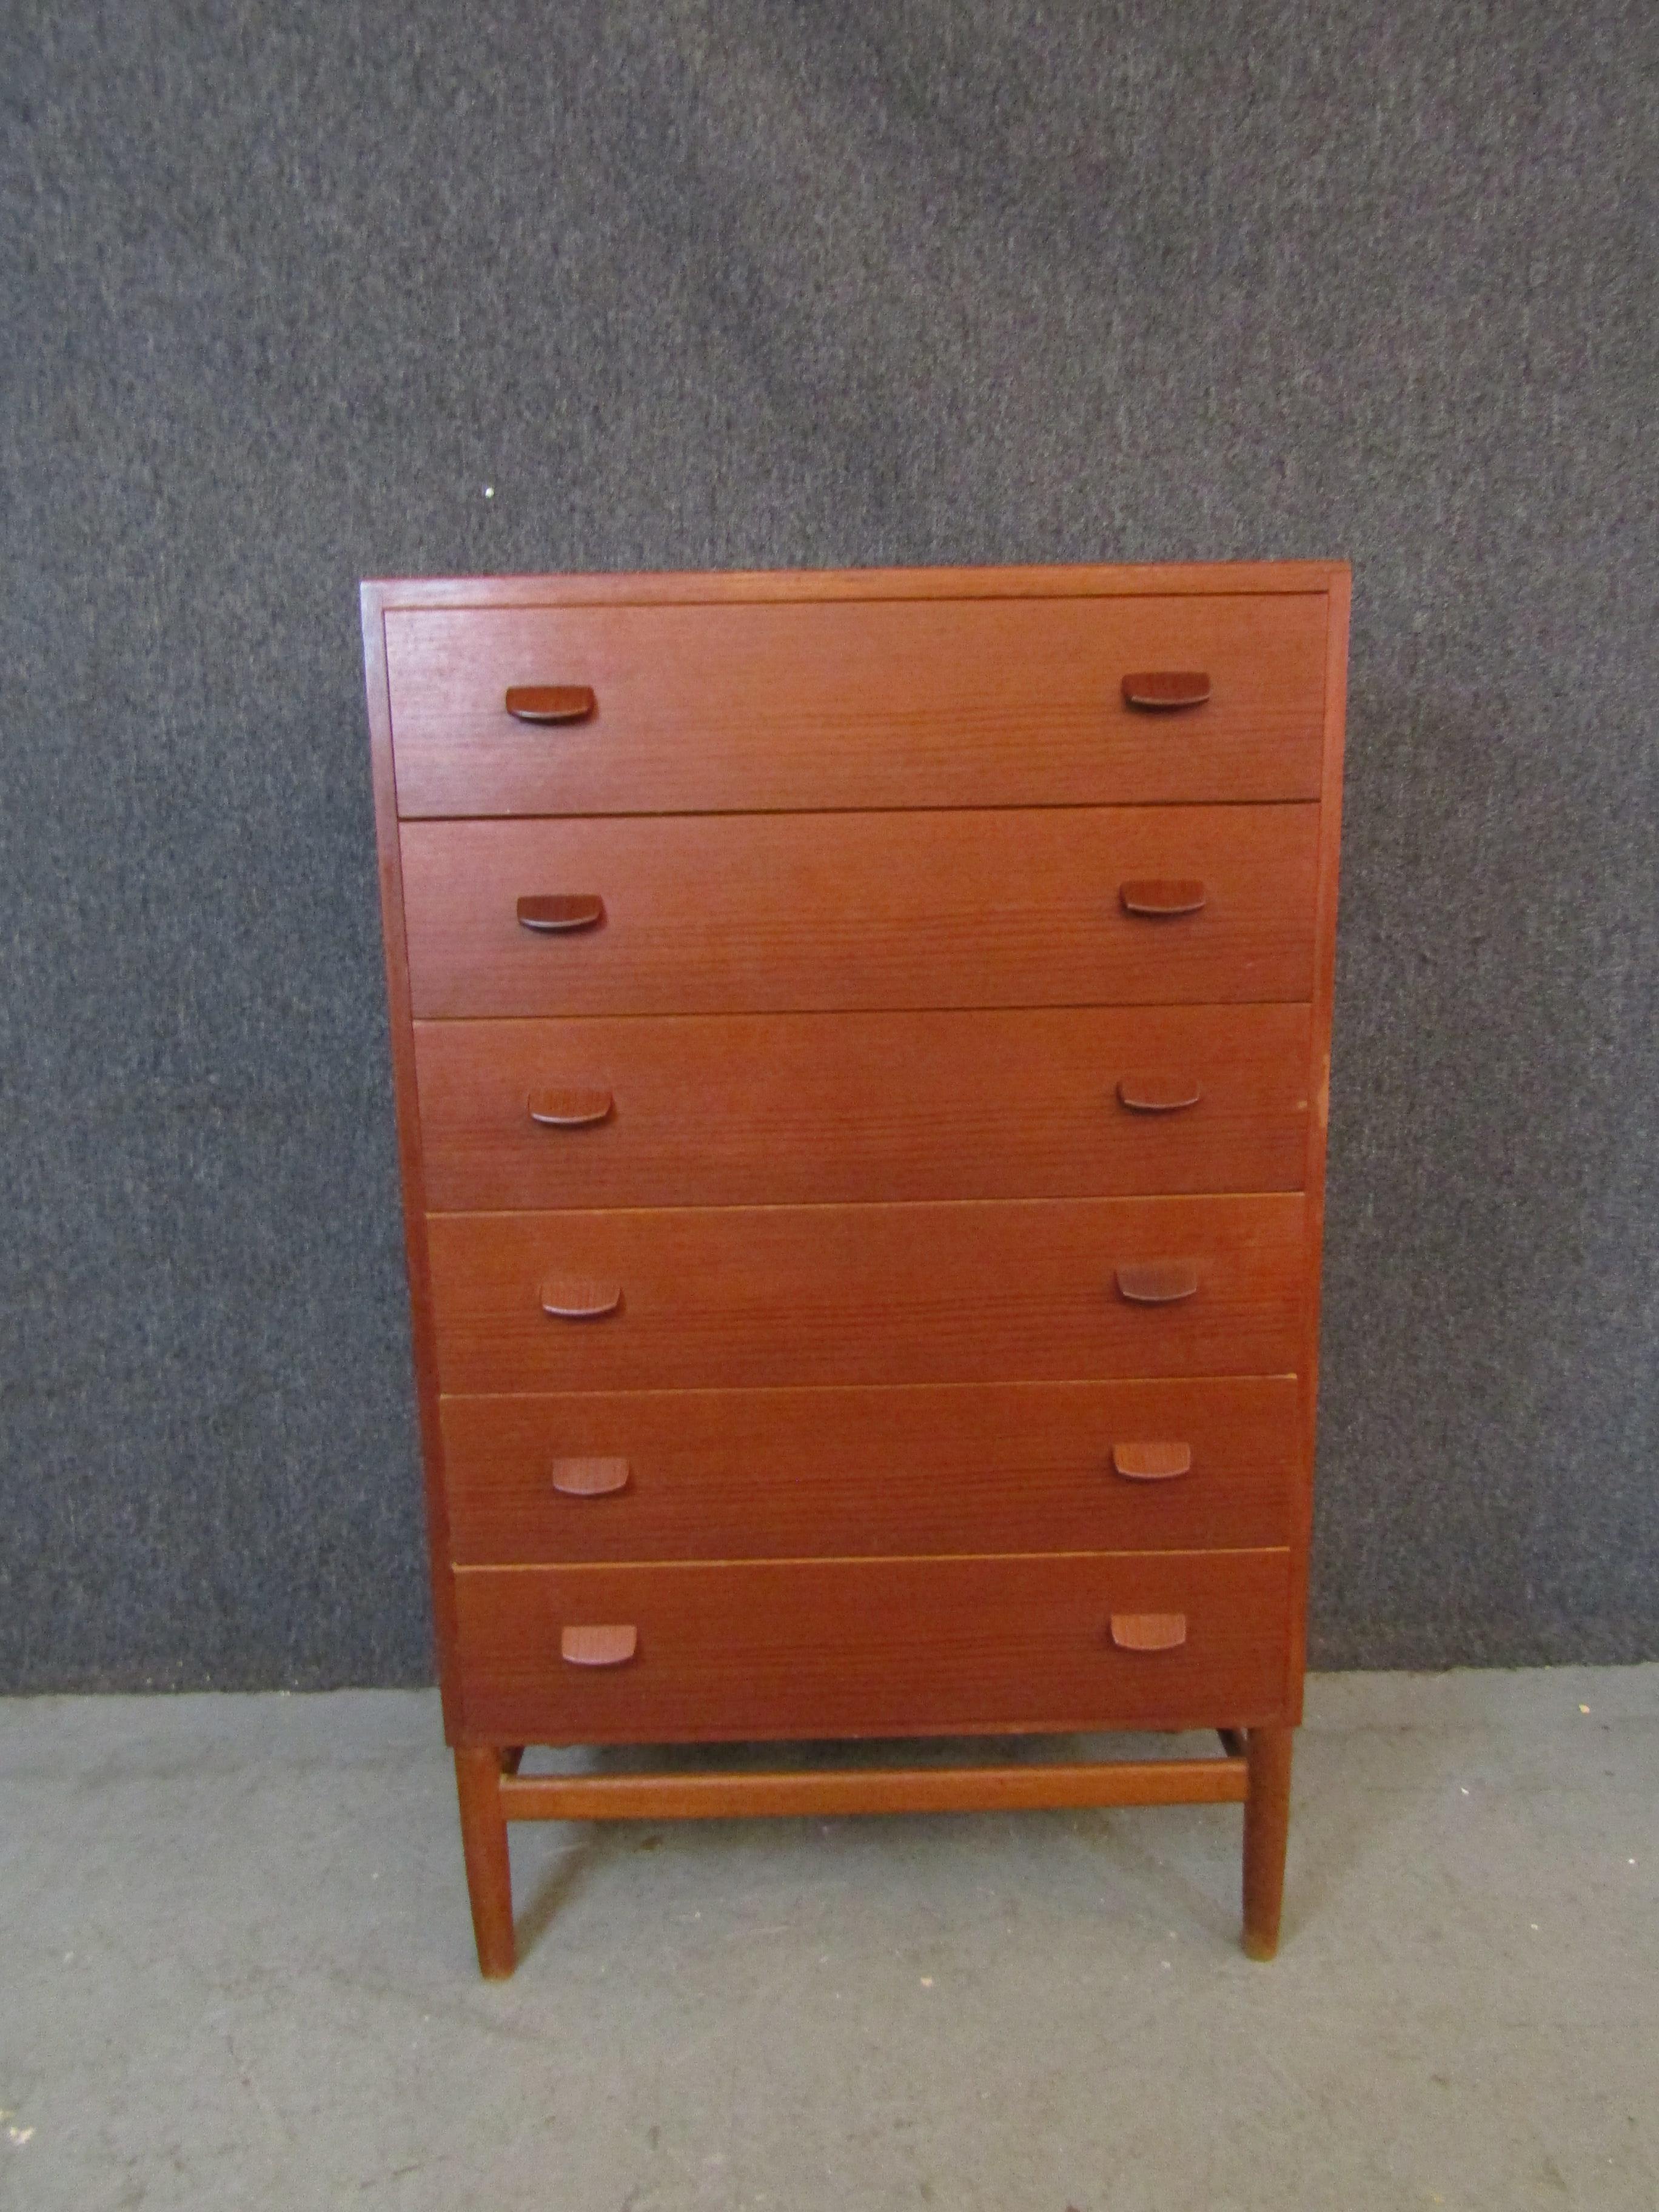 Bring home the timeless Scandinavian minimalism that exemplifies classic mid-century modern aesthetic with this stunning tall teak dresser designed by Denmark's Poul Volther. Six spacious pull-out drawers feature solid wood construction with fine